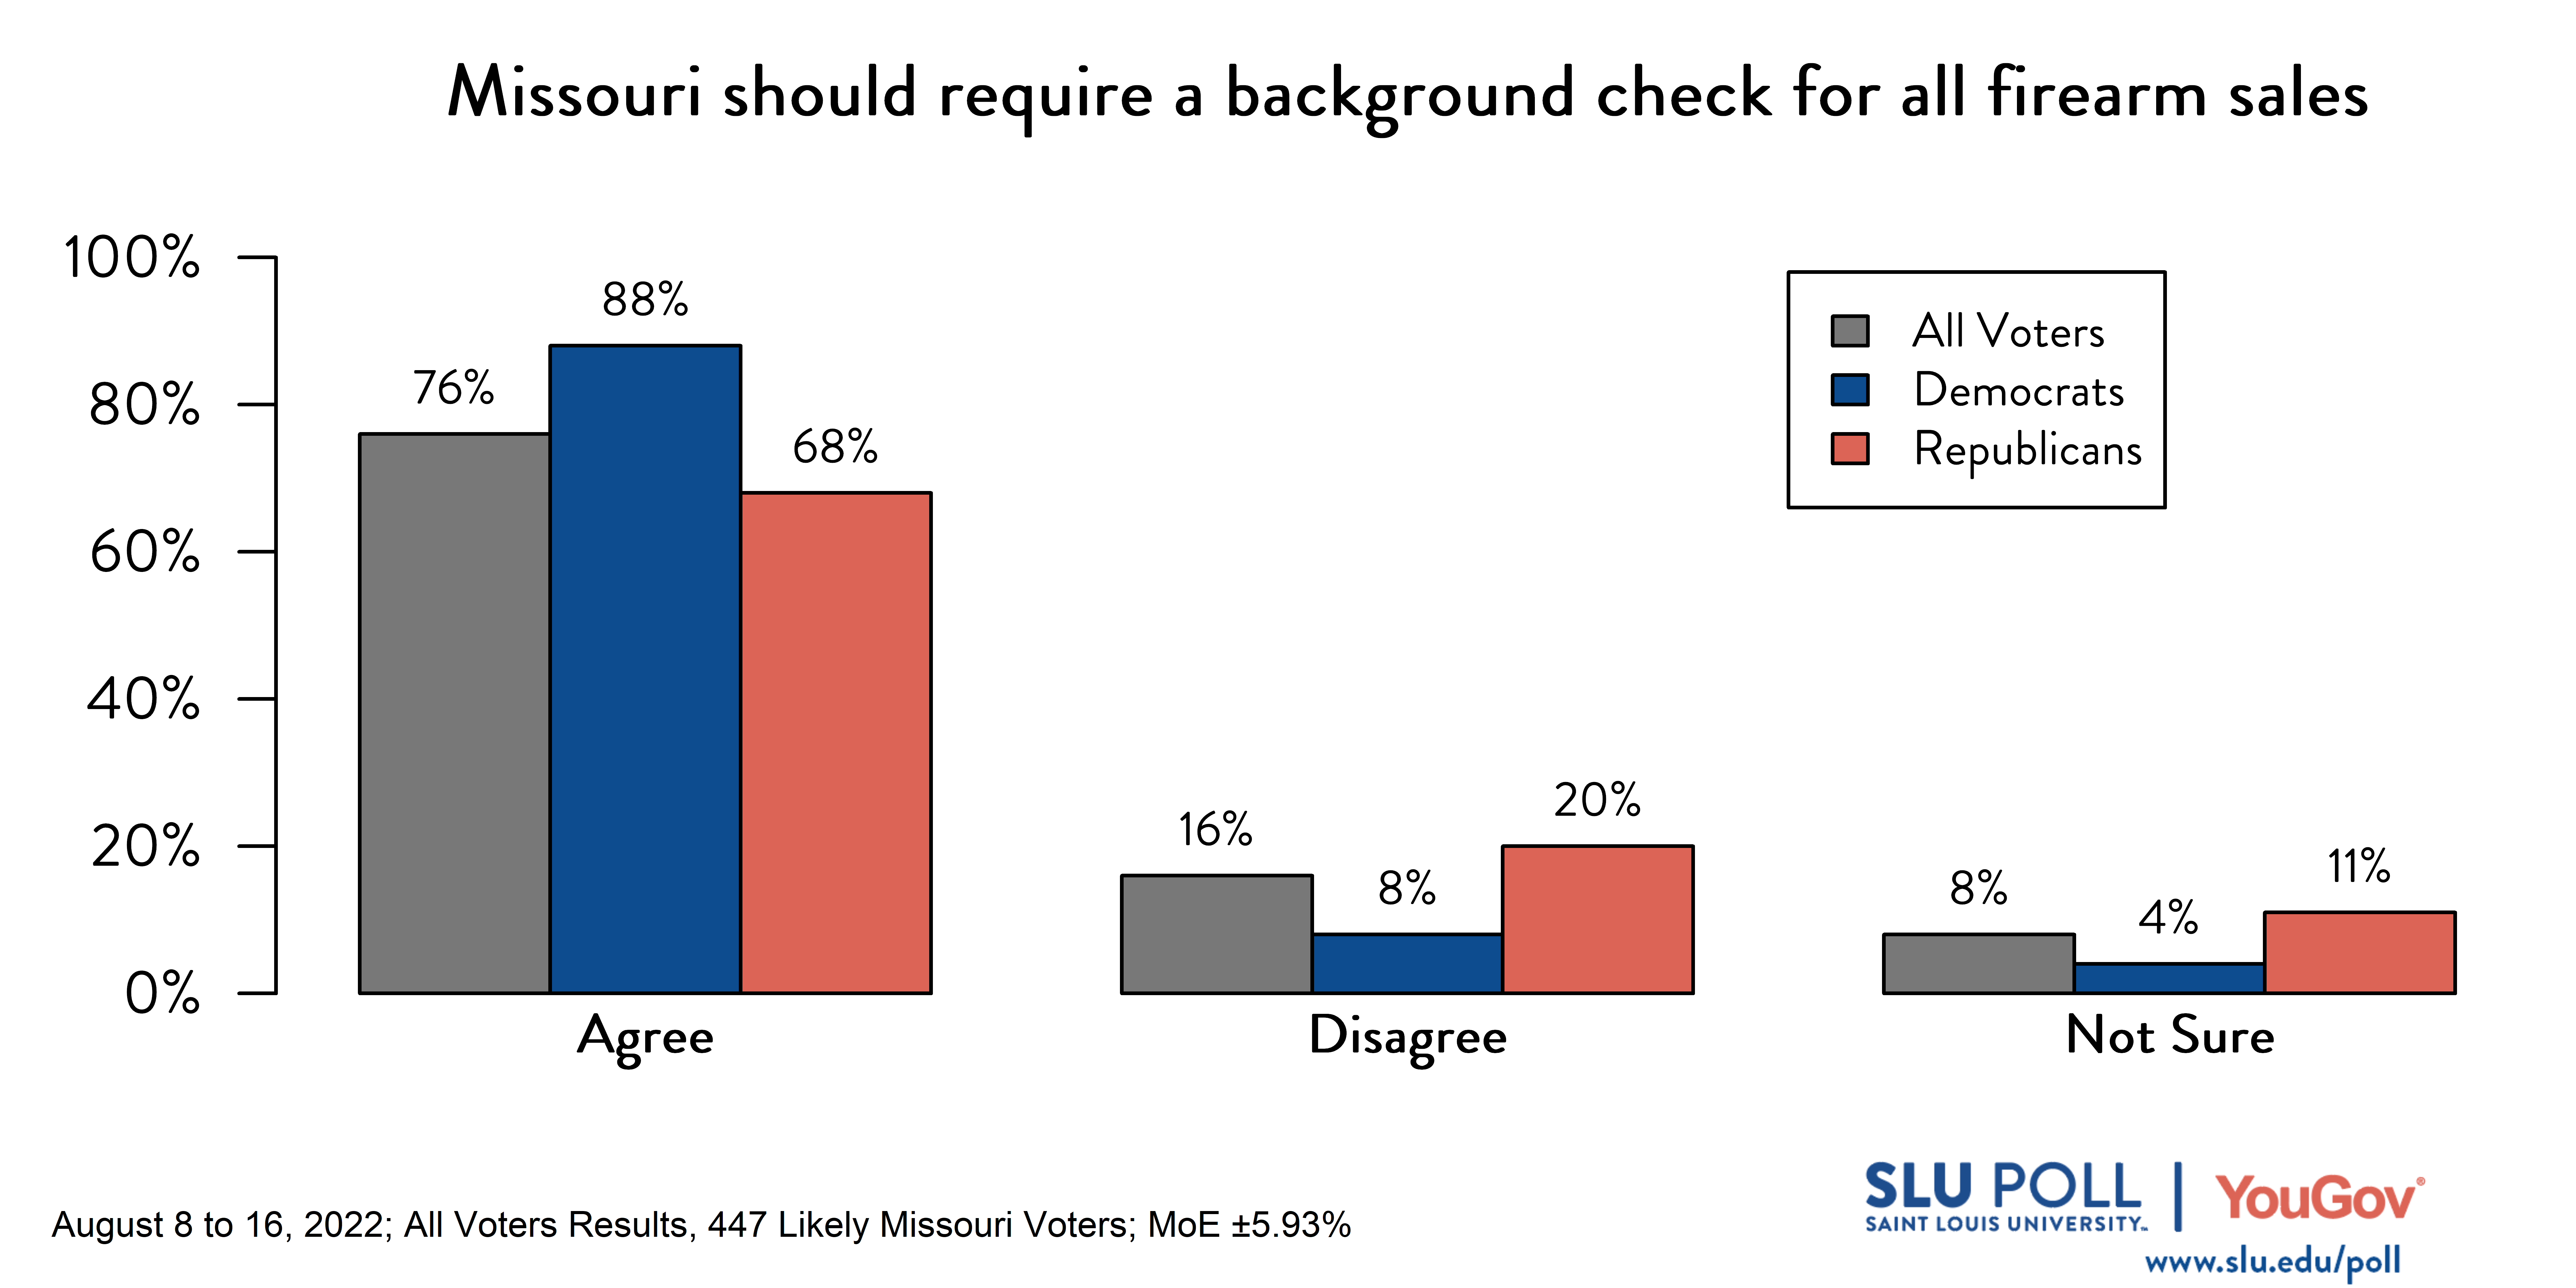 Likely voters' responses to 'Do you agree or disagree with the following statements: Missouri should require a background check for all firearm sales?': 76% Agree, 16% Disagree, and 8% Not Sure. Democratic voters' responses: ' 88% Agree, 8% Disagree, and 4% Not Sure. Republican voters' responses: 68% Agree, 20% Disagree, and 11% Not Sure. 